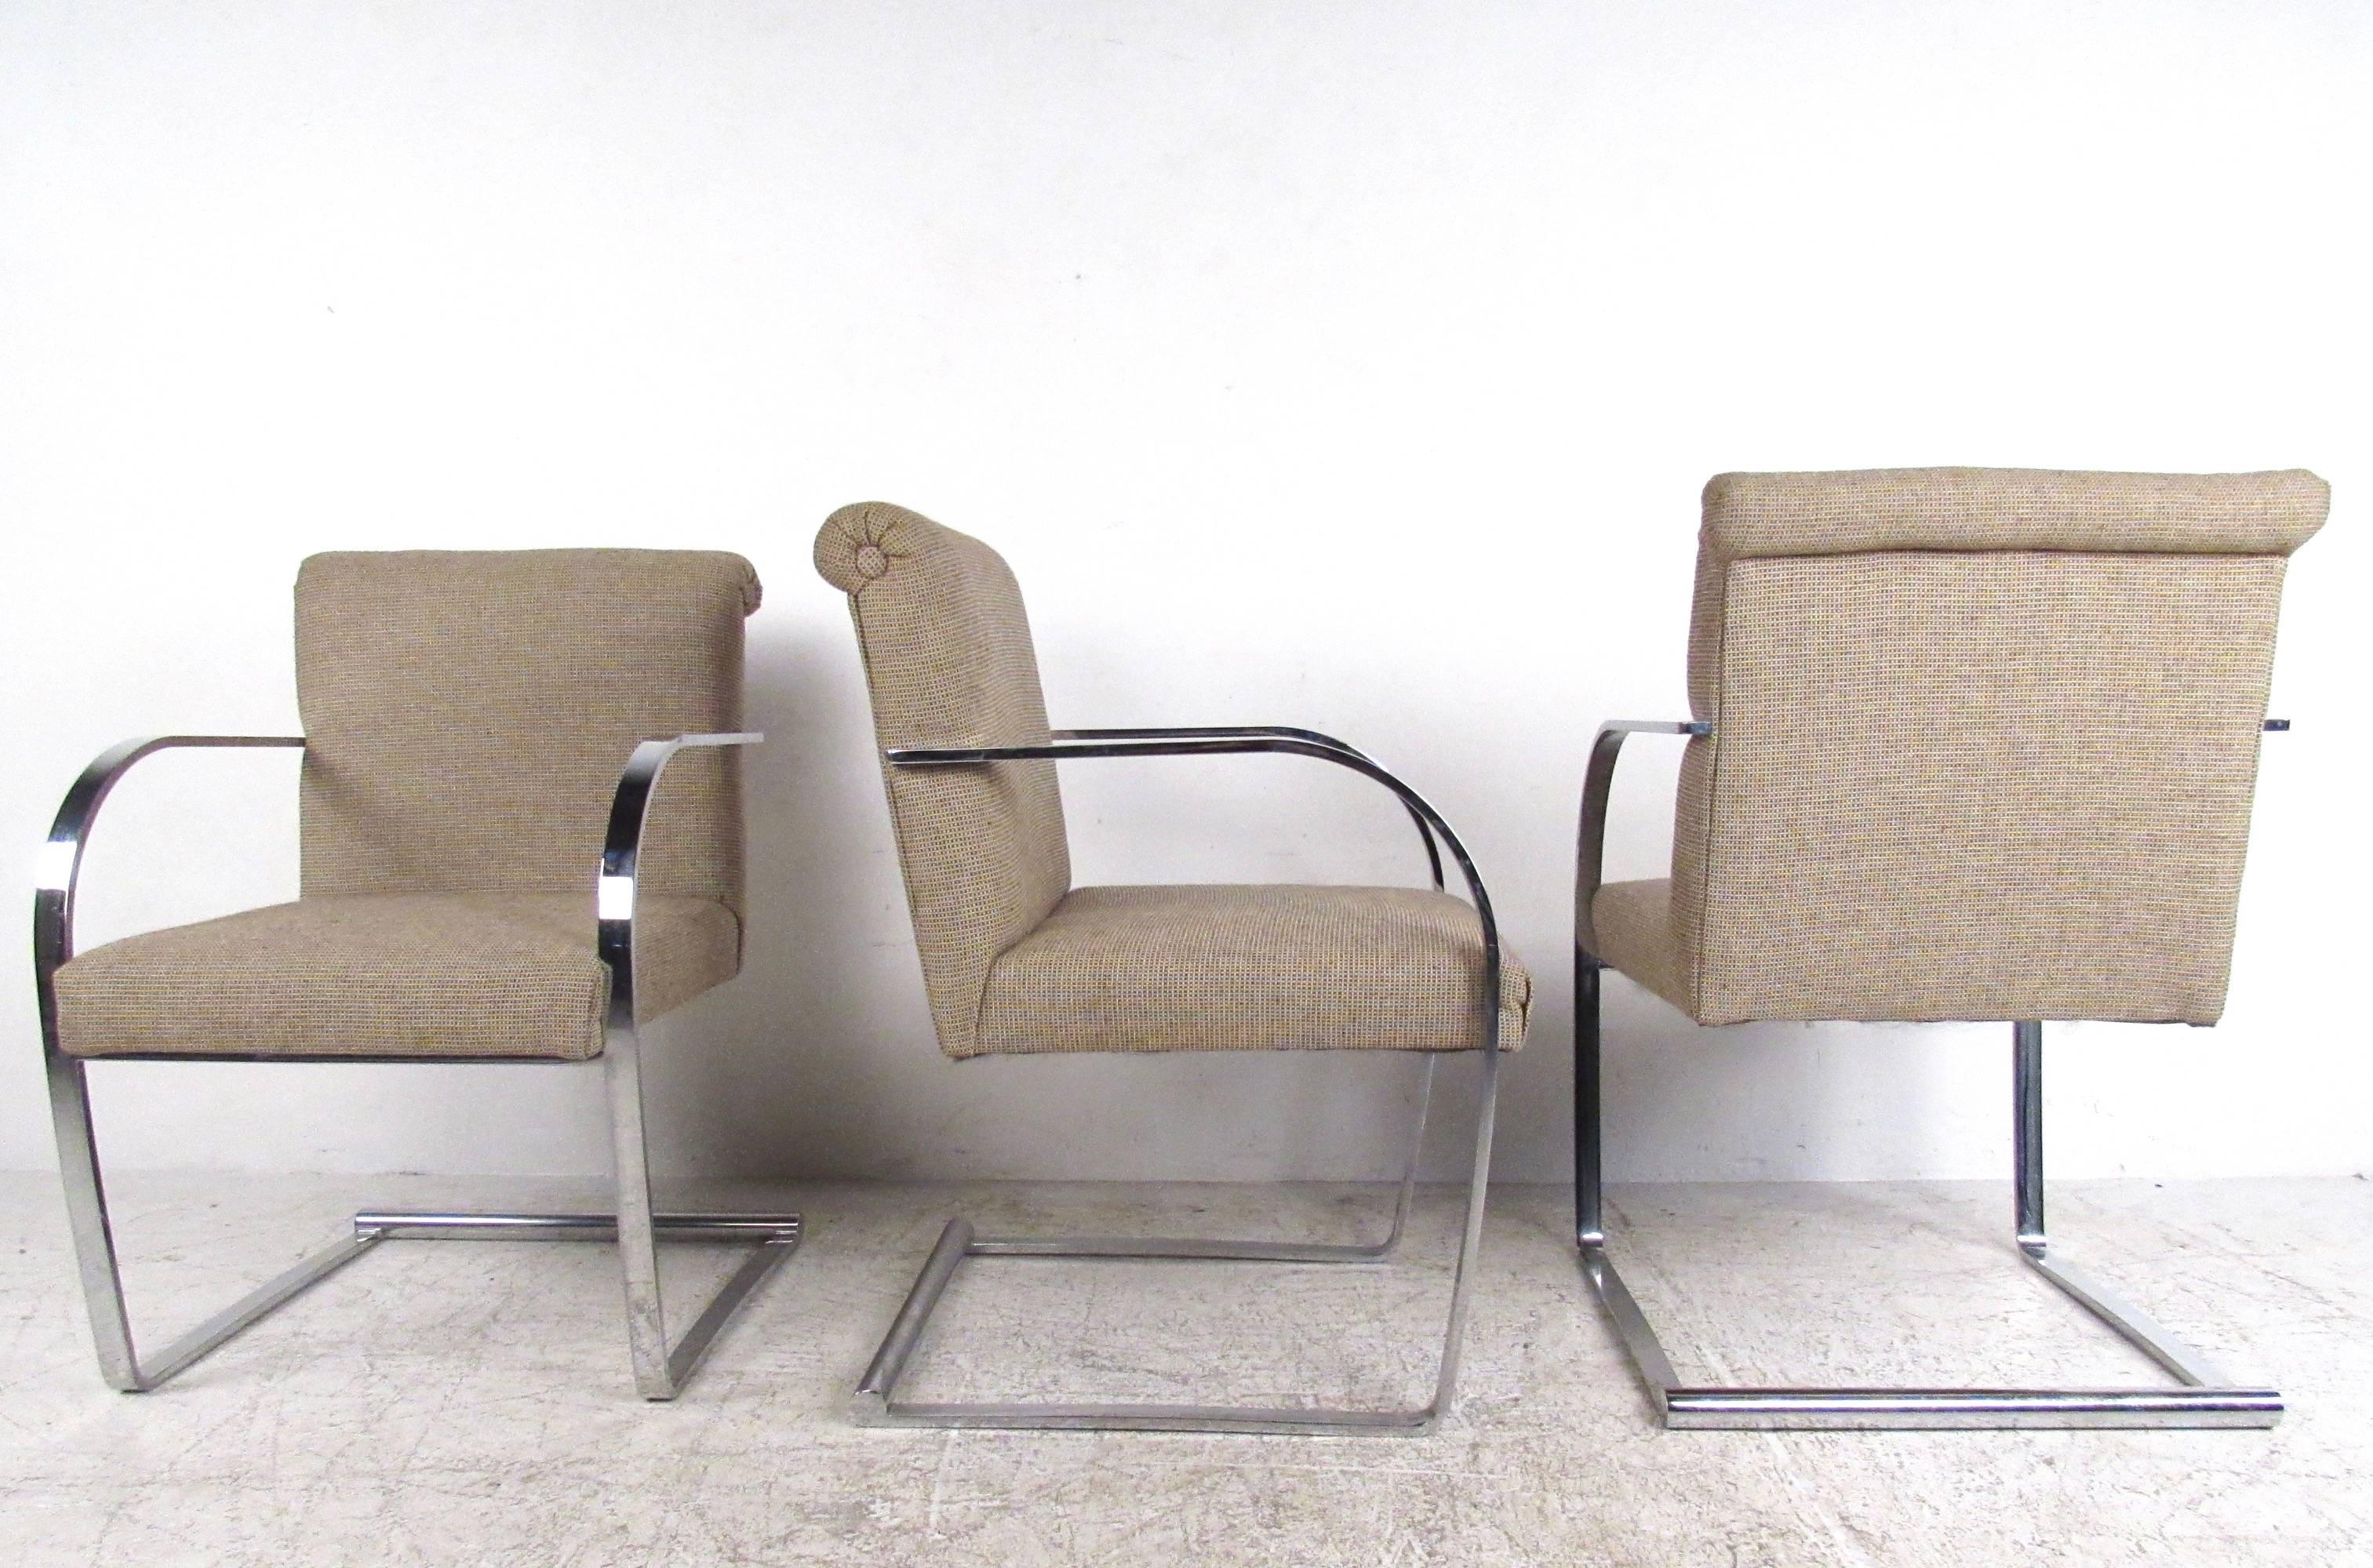 Set of Four Mid-Century Modern Knoll Style Brno Dining Chairs In Good Condition For Sale In Brooklyn, NY